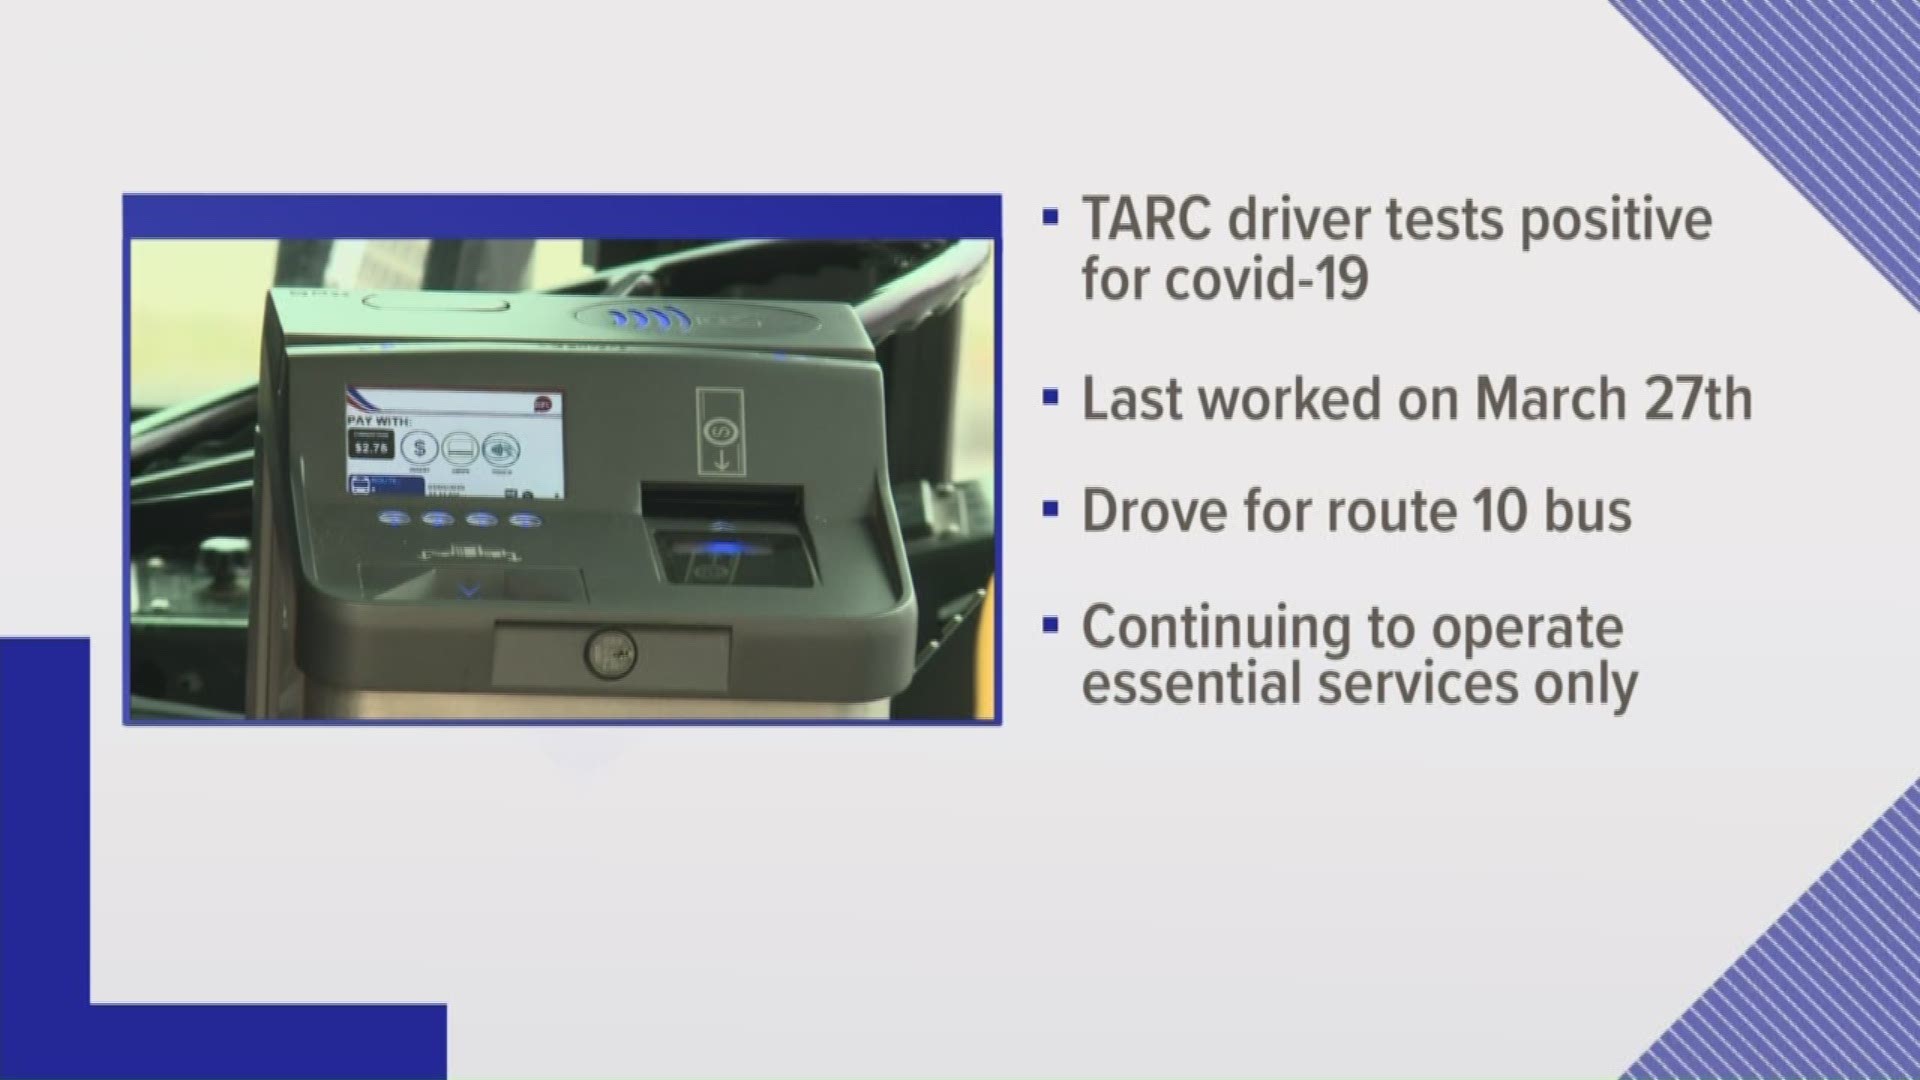 Officials say the operator drove Route 10 which services the Dixie Rapid transit.